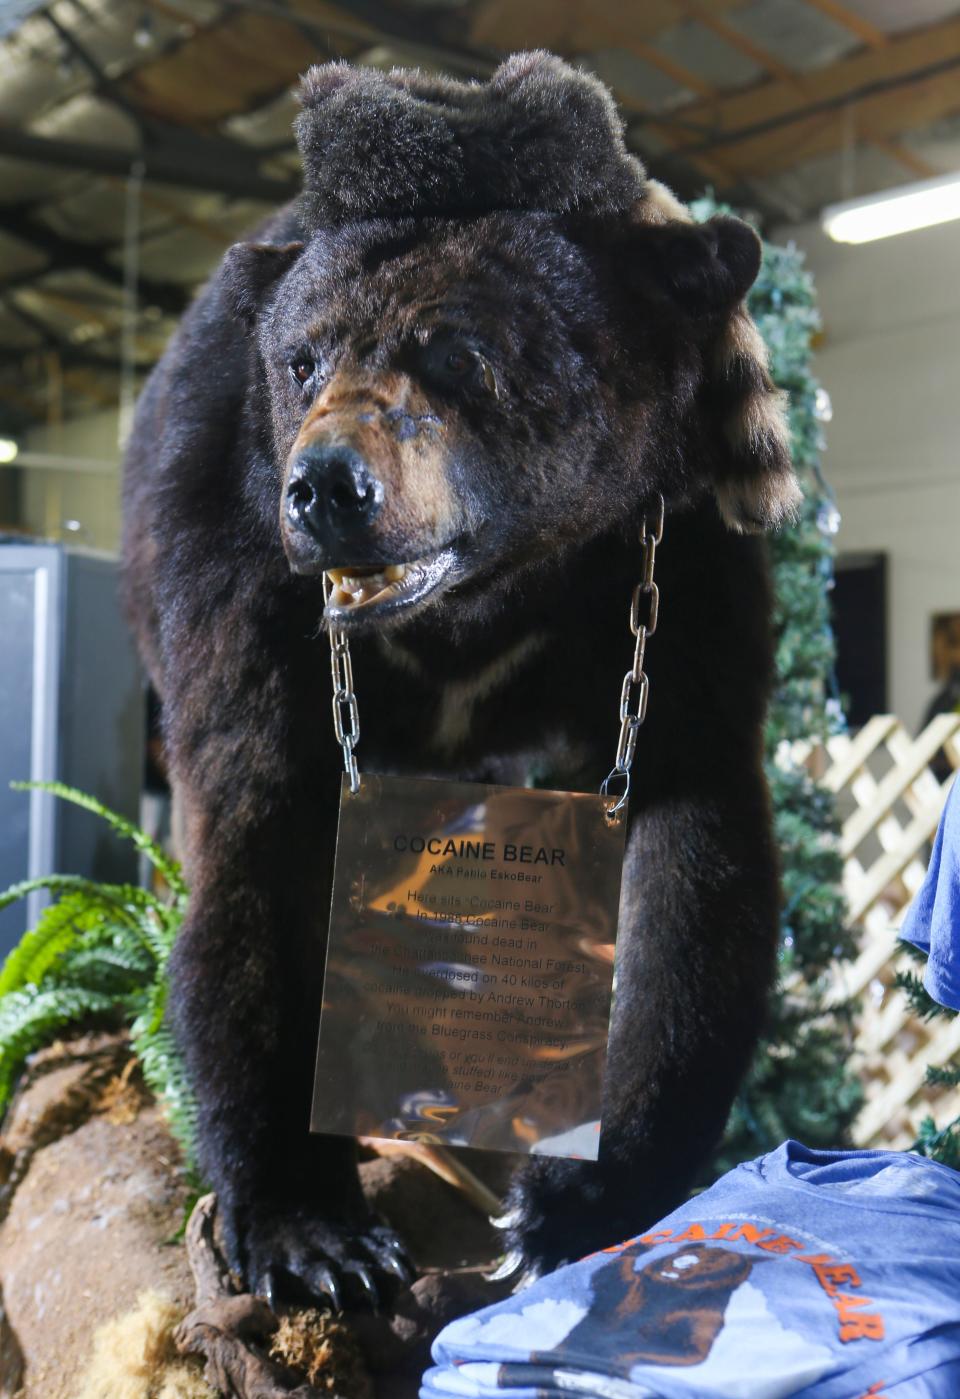 The Cocaine Bear, now shown at the Kentucky for Kentucky Fun Mall, was a 175-pound black bear from Chattahoochee National Forest that died after eating about 75 pounds of cocaine that was lost by Kentuckian drug smuggler Andrew Thornton in 1985. The Georgia state examiner had the animal taxidermised. Waylon Jennings once owned the stuffed bear. March 4, 2020.